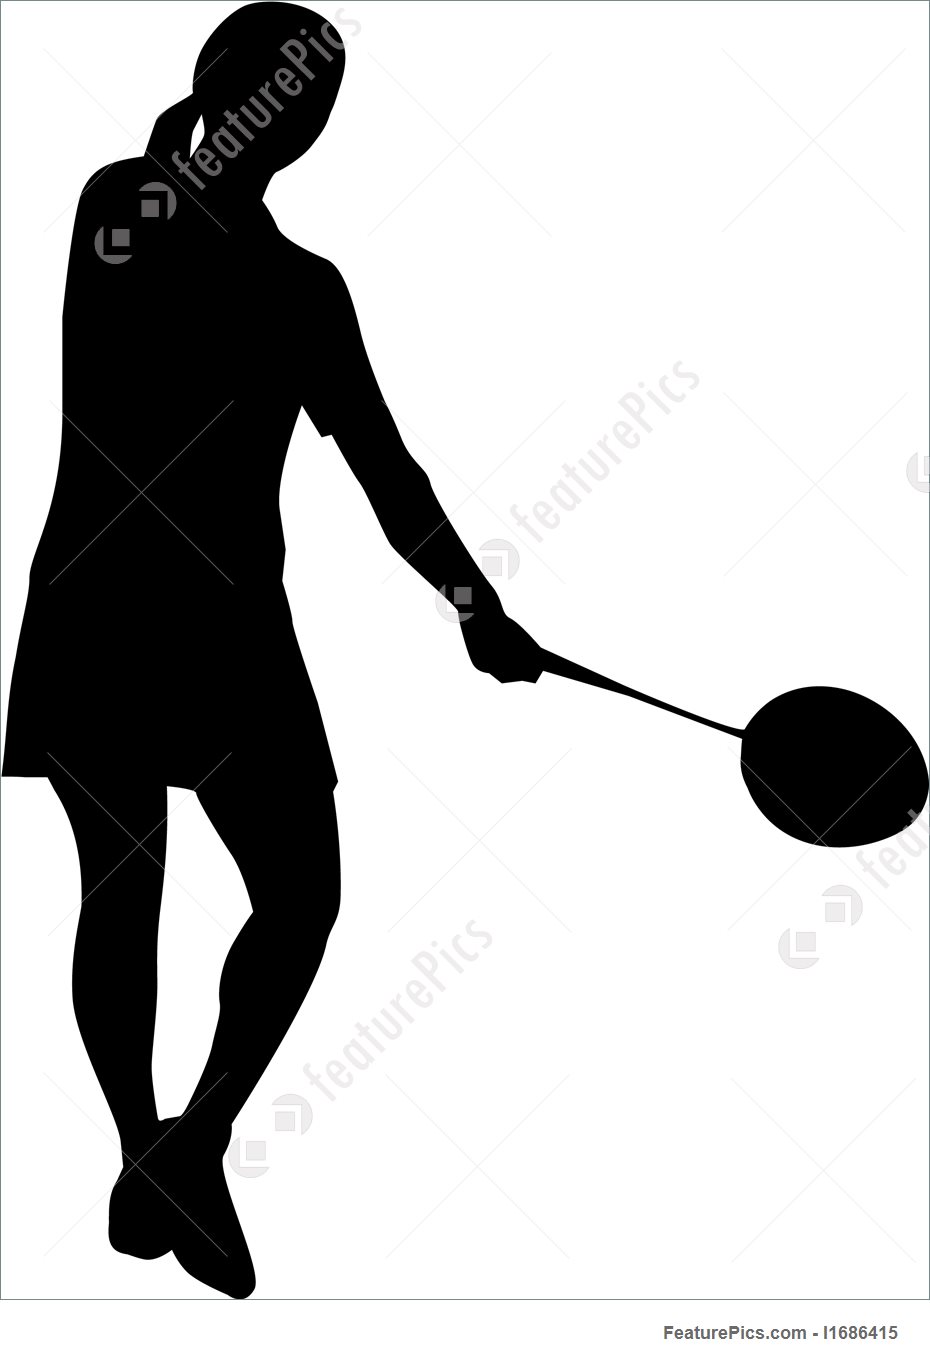 Athlete clipart badminton. Silhouette at getdrawings com